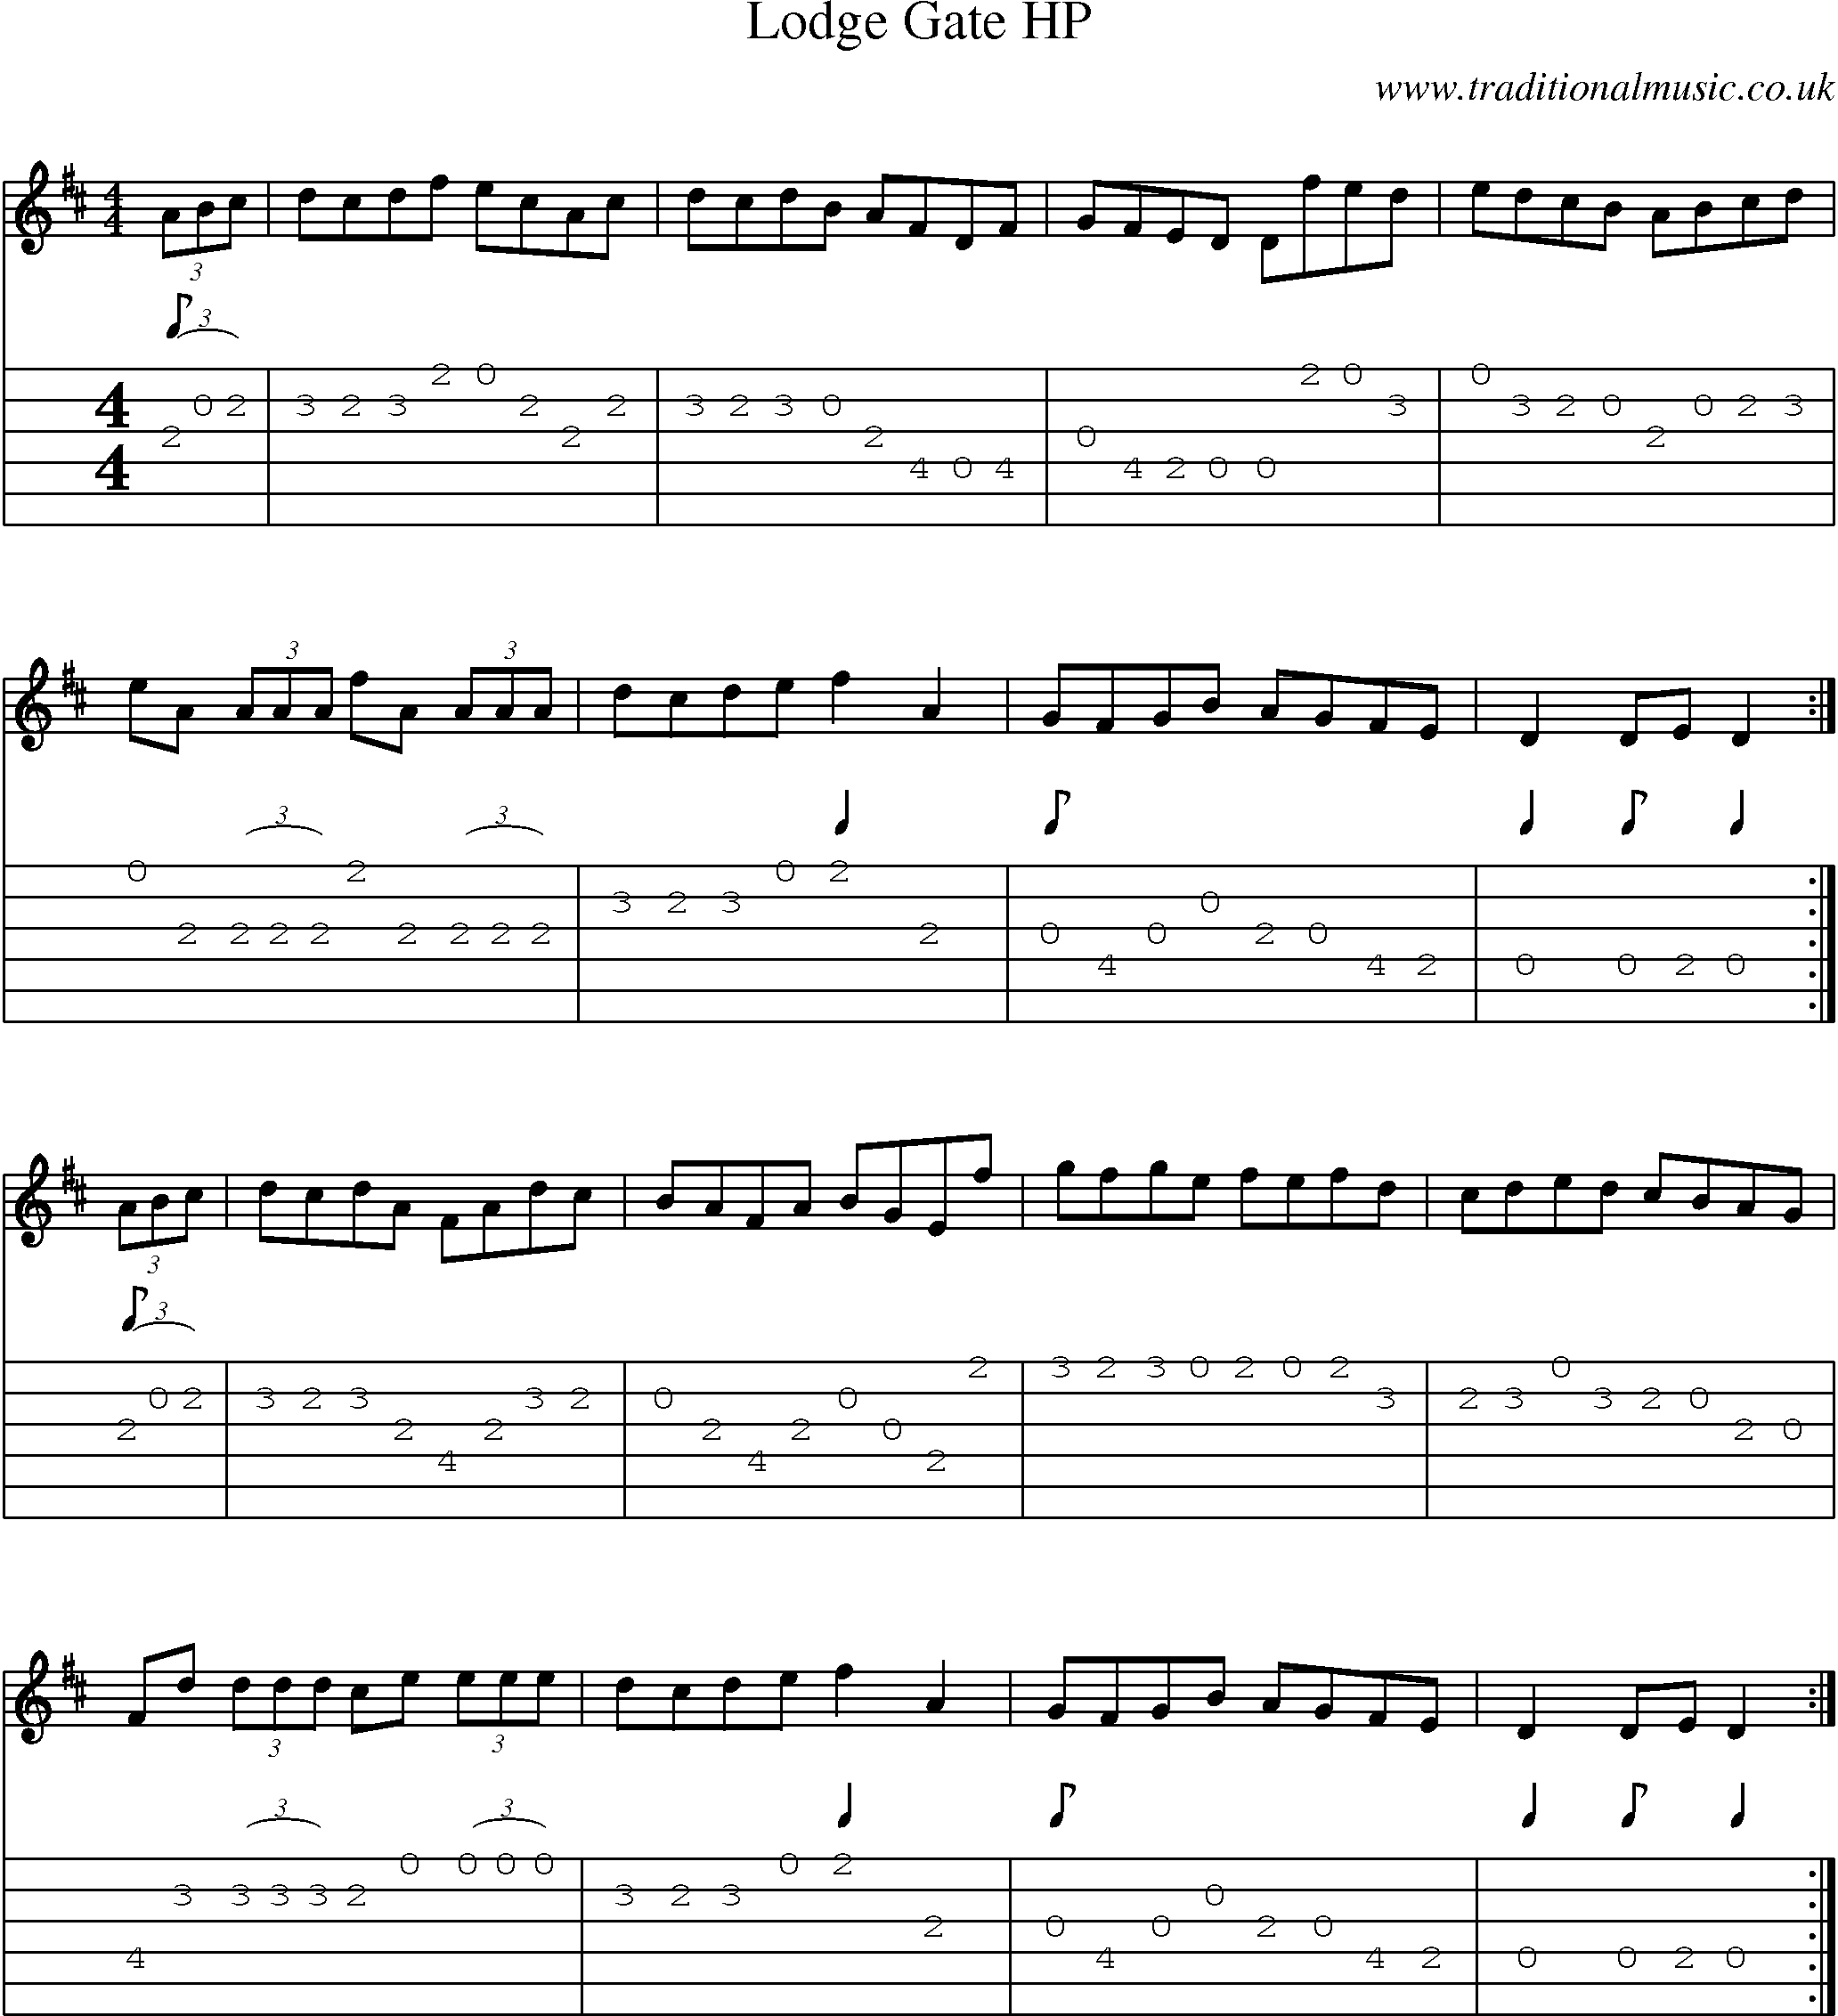 Music Score and Guitar Tabs for Lodge Gate